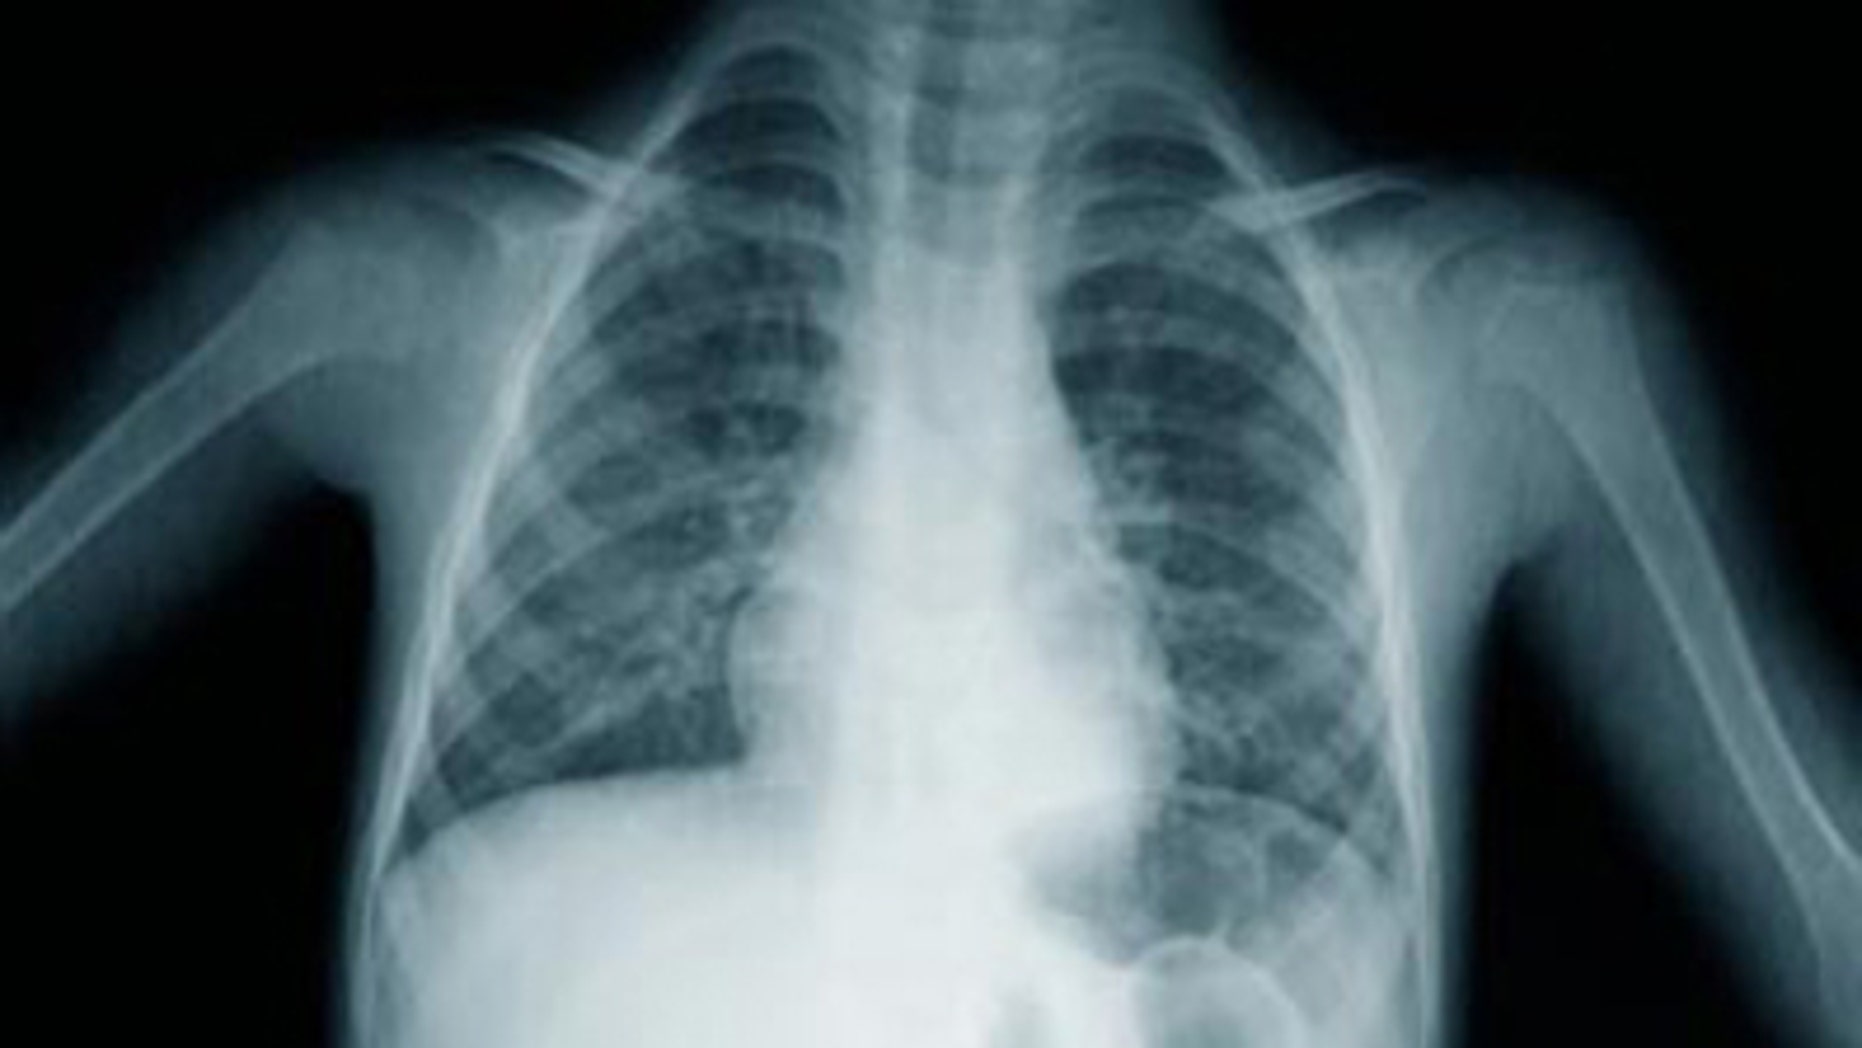 X-Ray Lung Cancer Screening Does Not Prevent Deaths | Fox News